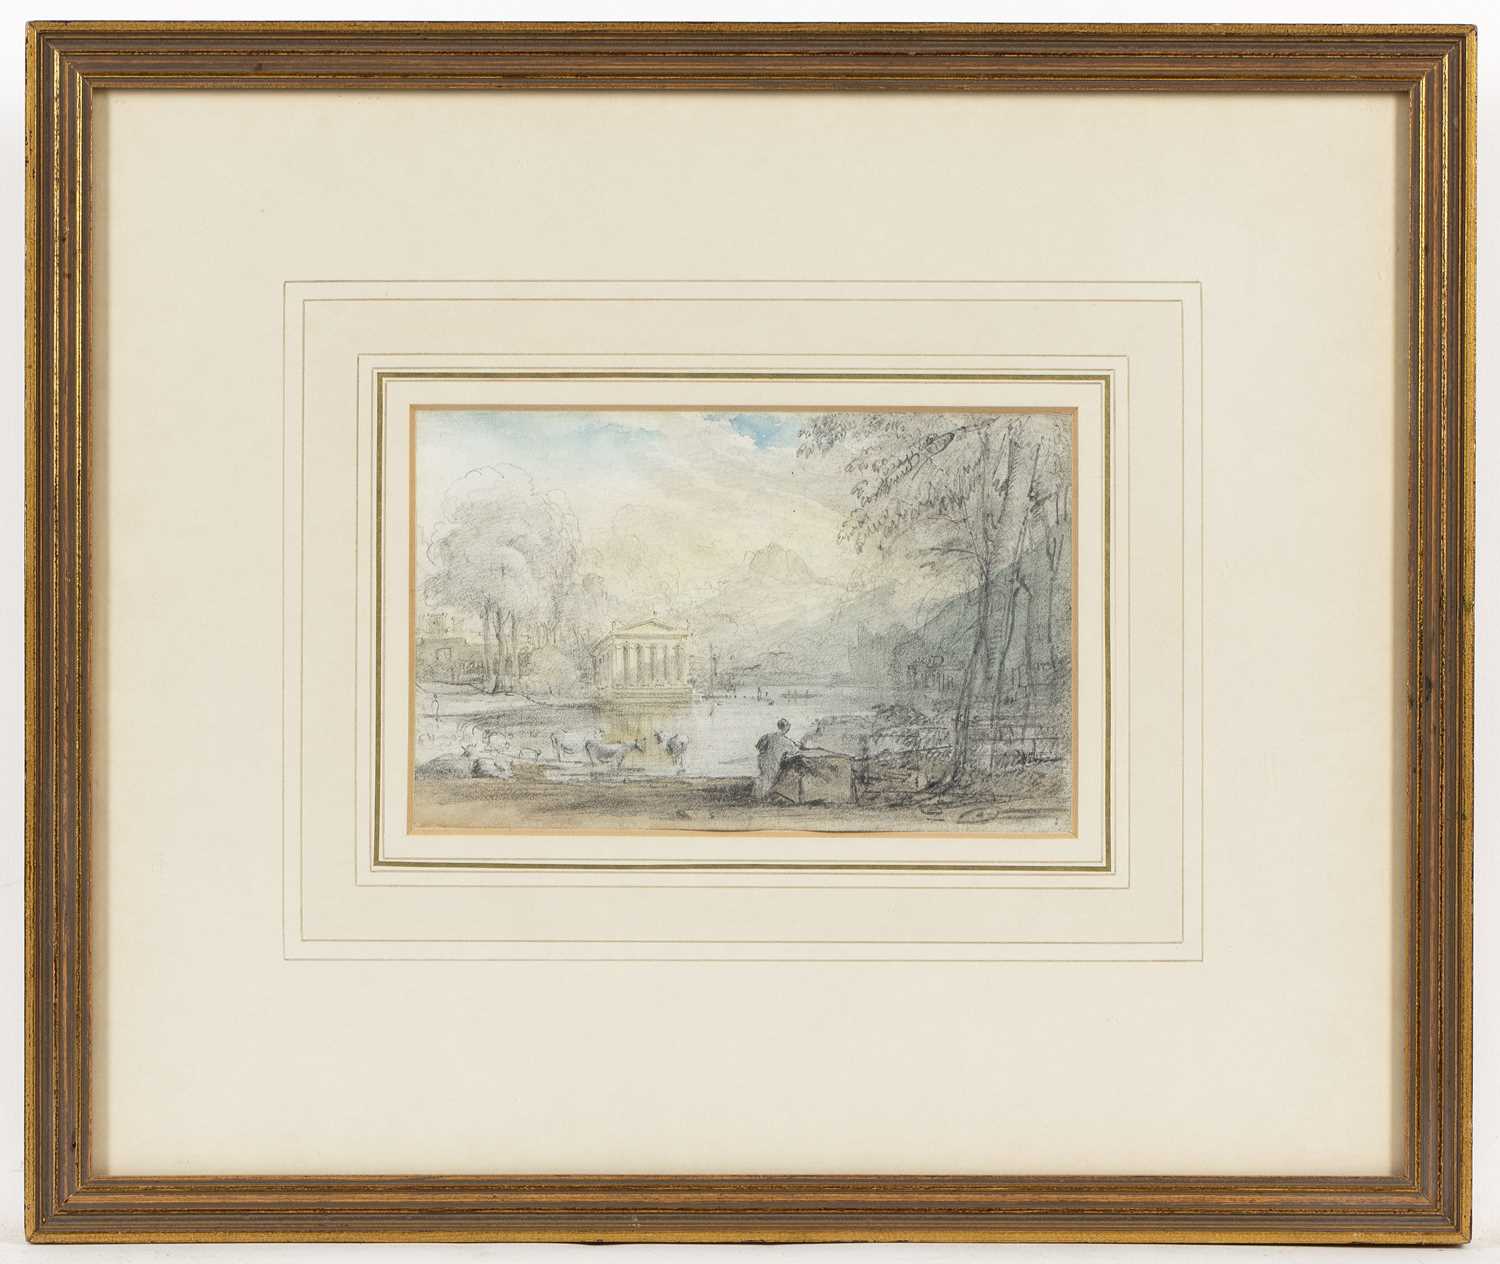 John Varley (1778-1842) Ruins in a landscape, pencil and watercolour, 11 x 17cm - Image 2 of 3